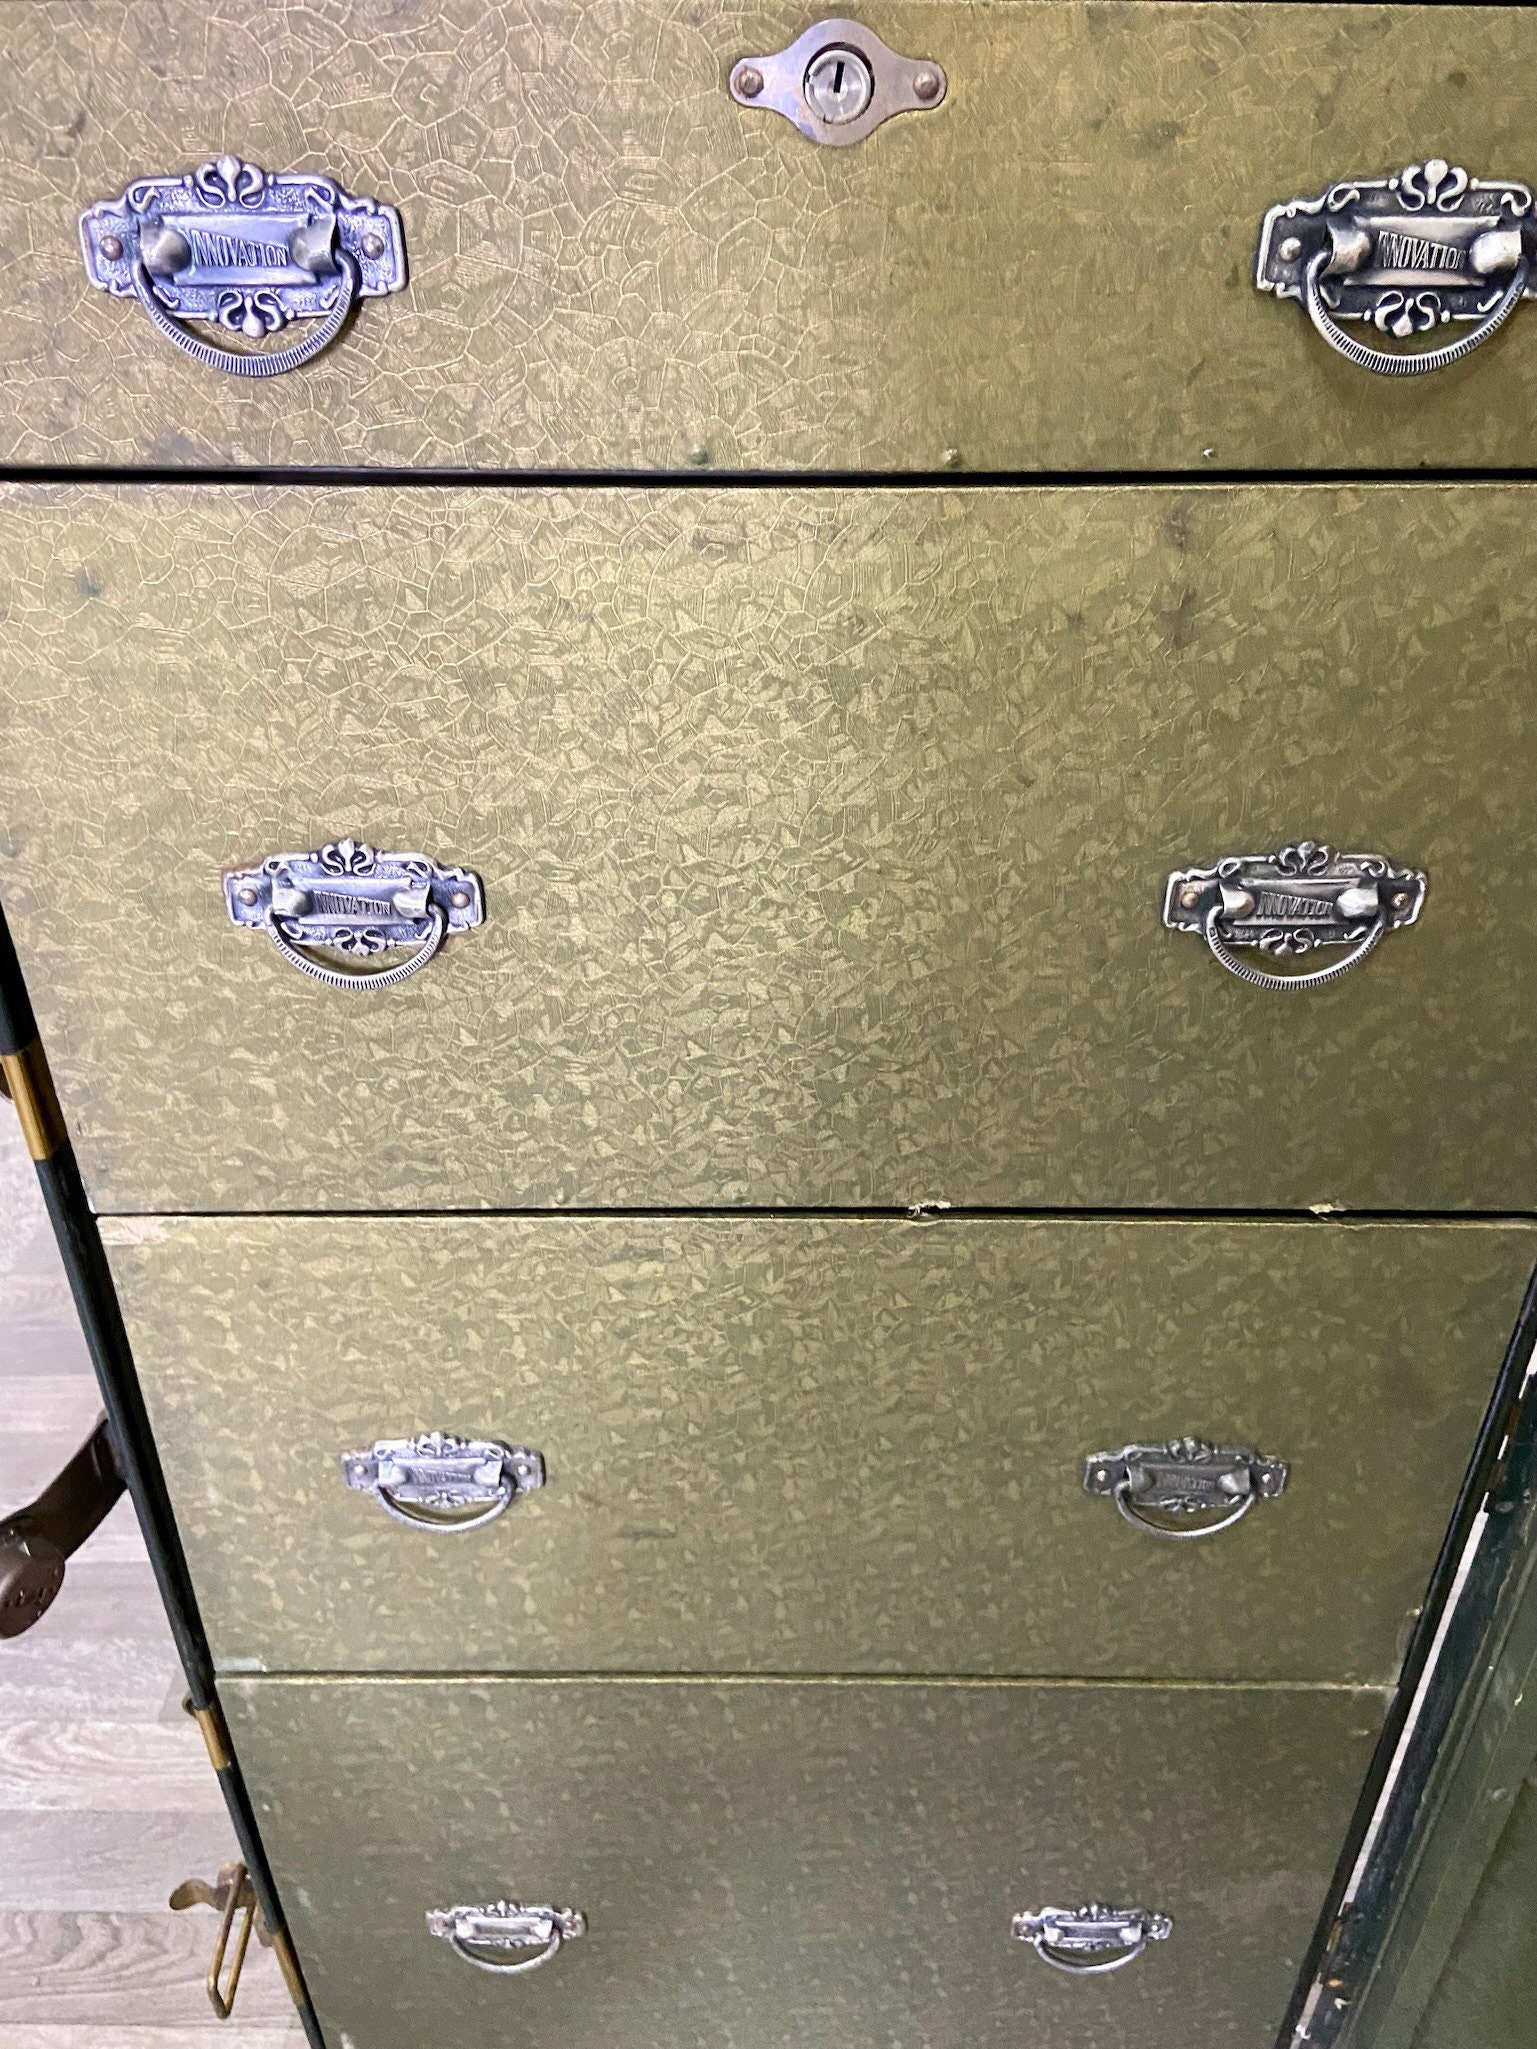 Antique Early 1900s Innovation Brand Green Steamer Trunk Suitcase